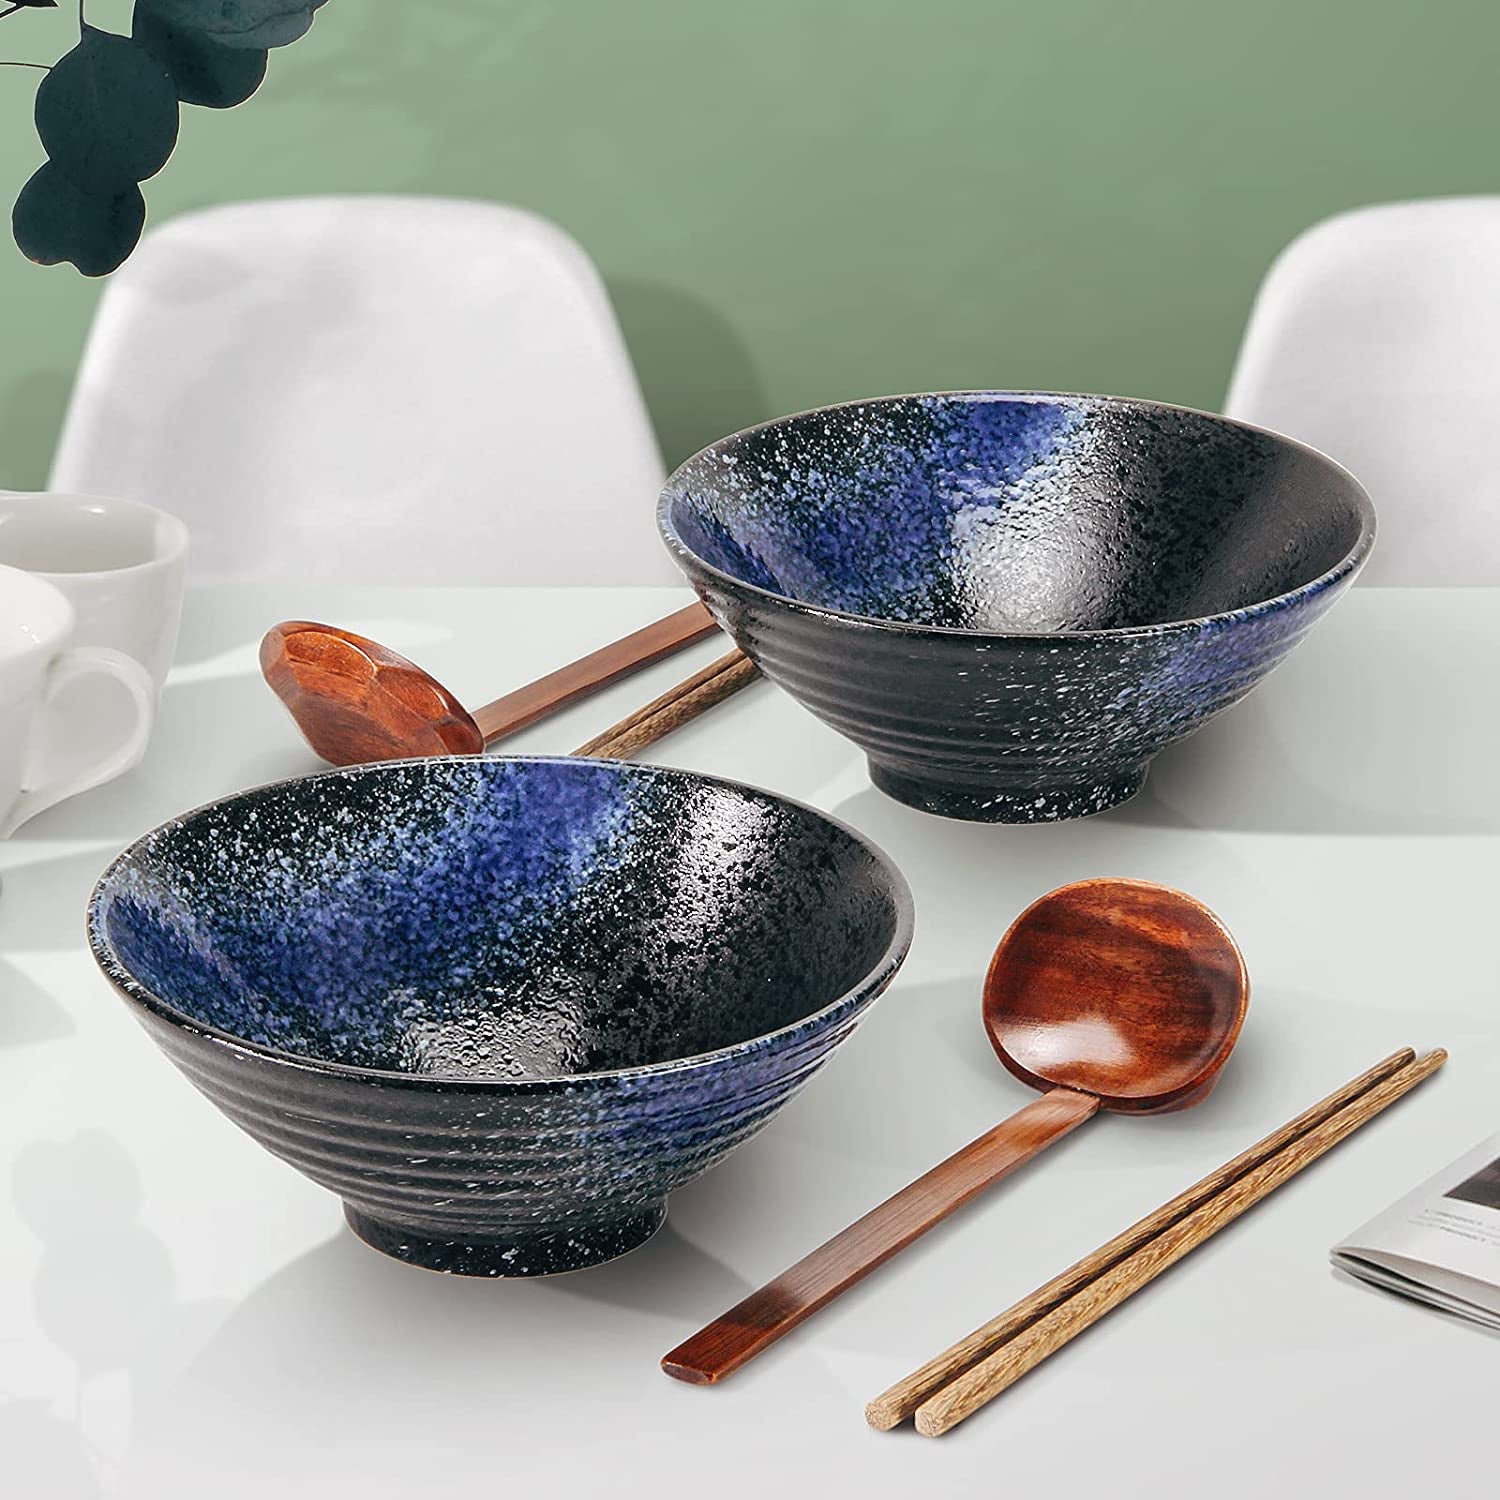 Pottery Ramen Bowls Set of 2 - Ideal for Noodle Salad Pasta Dinnerware Ceramic Japanese Bowl 2×1000 Ml 34 Ounces Capacity with Chopsticks and Spoon Men and Women Gifts Ideas Porcelain - Starry Blue